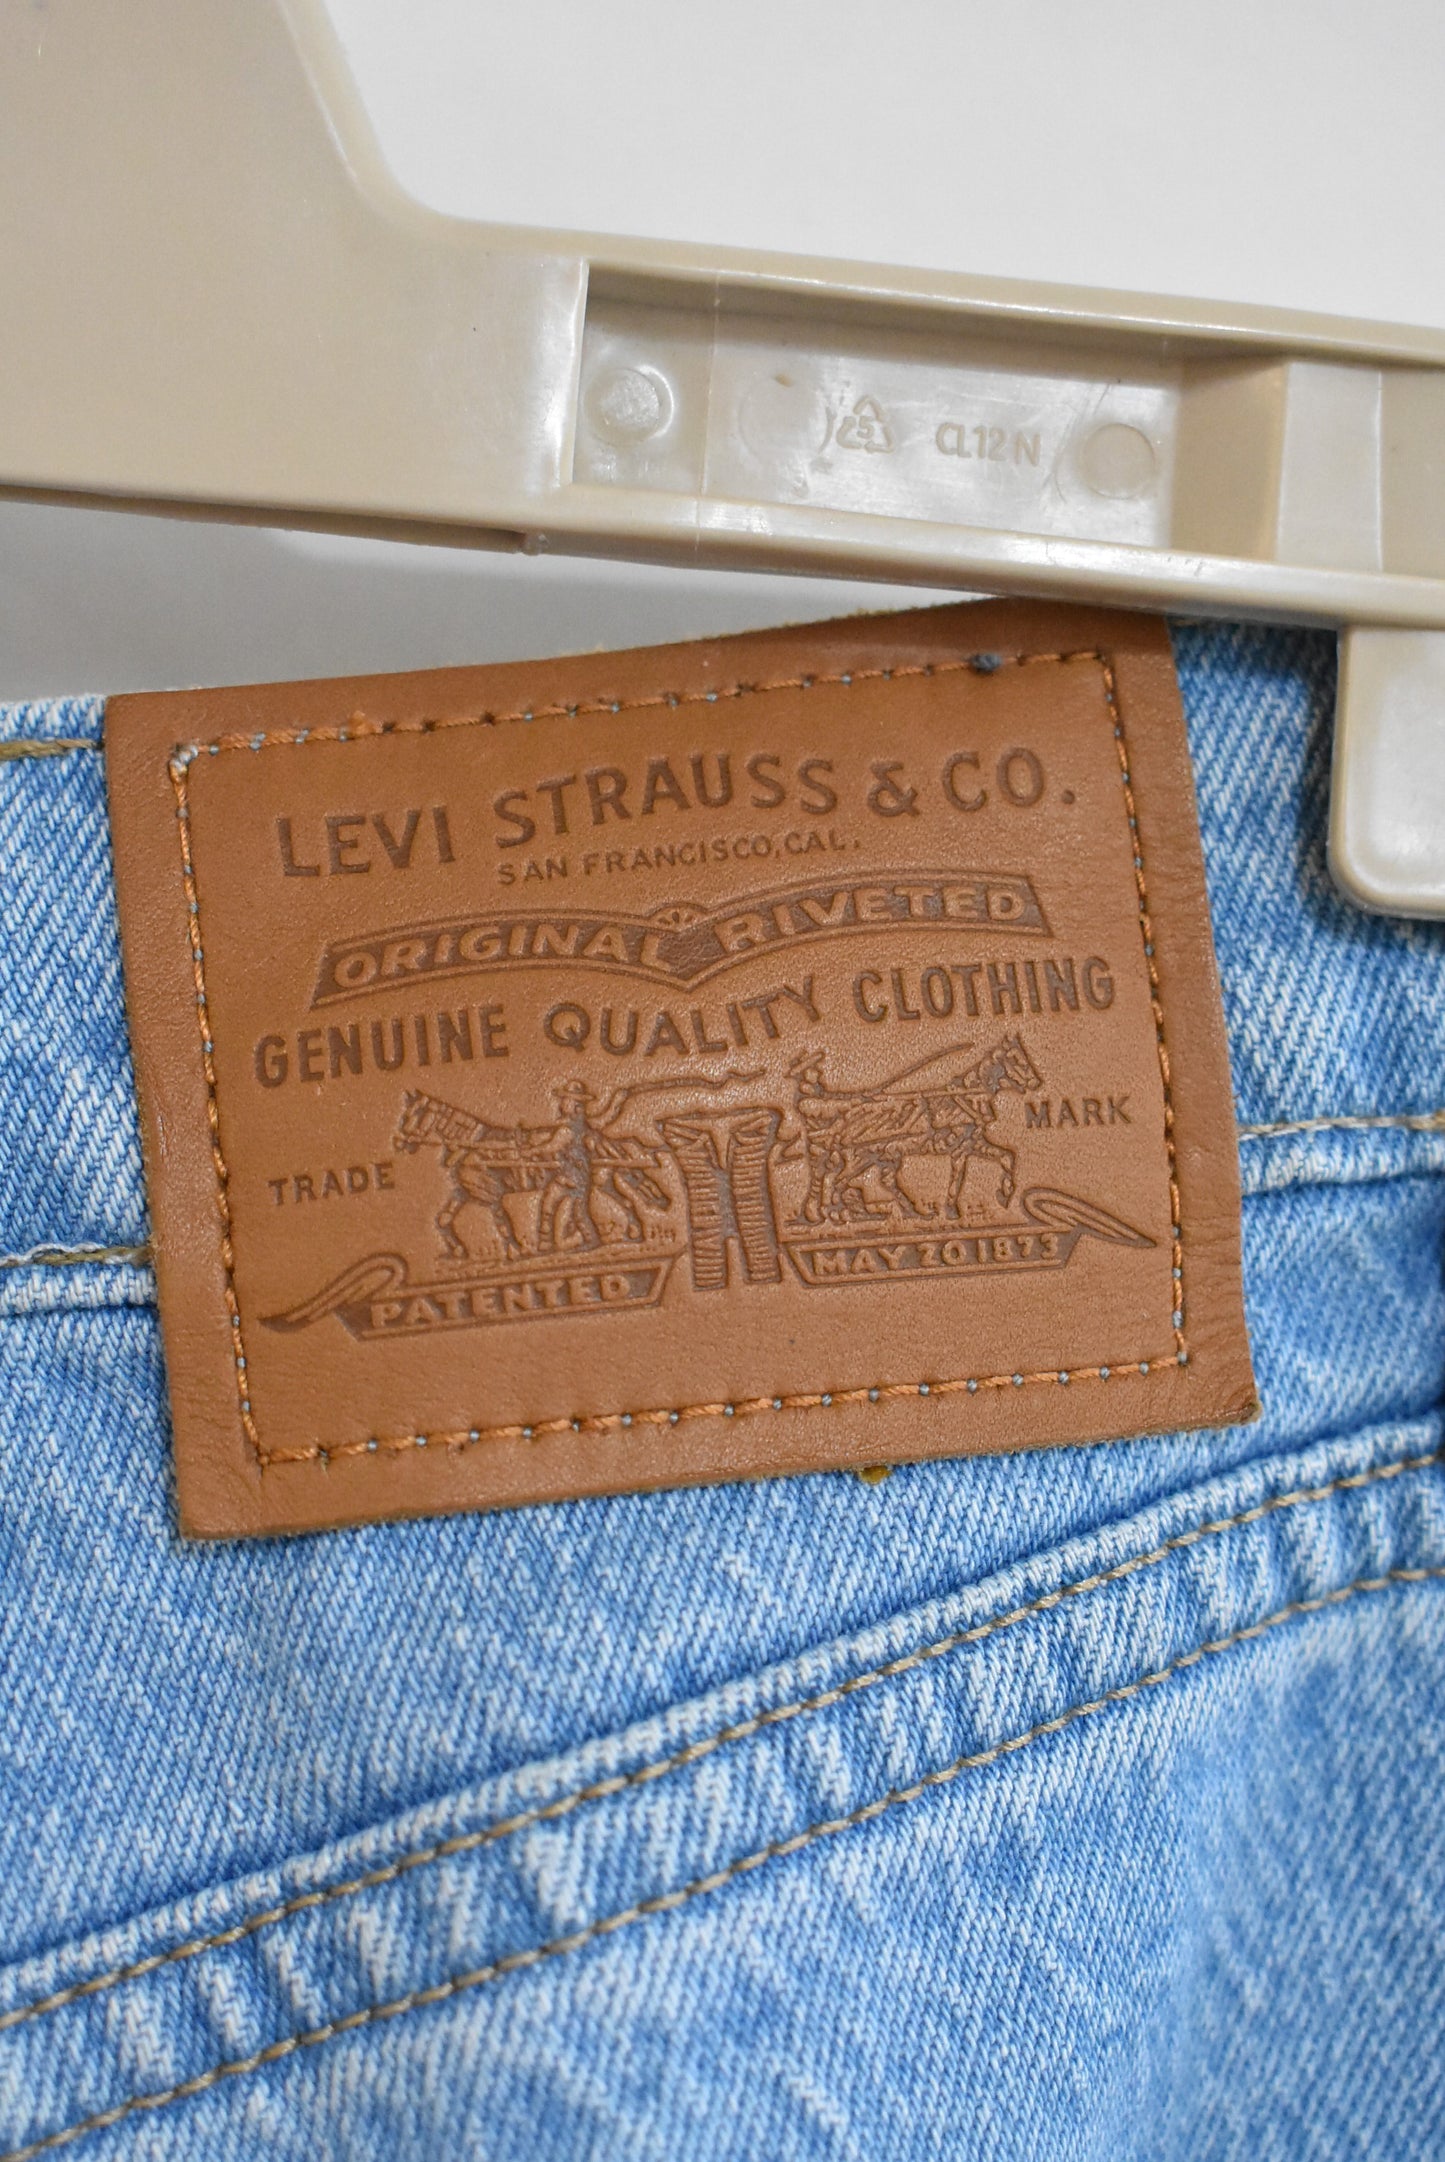 Levi's high-waisted bootcut jeans (size XS)